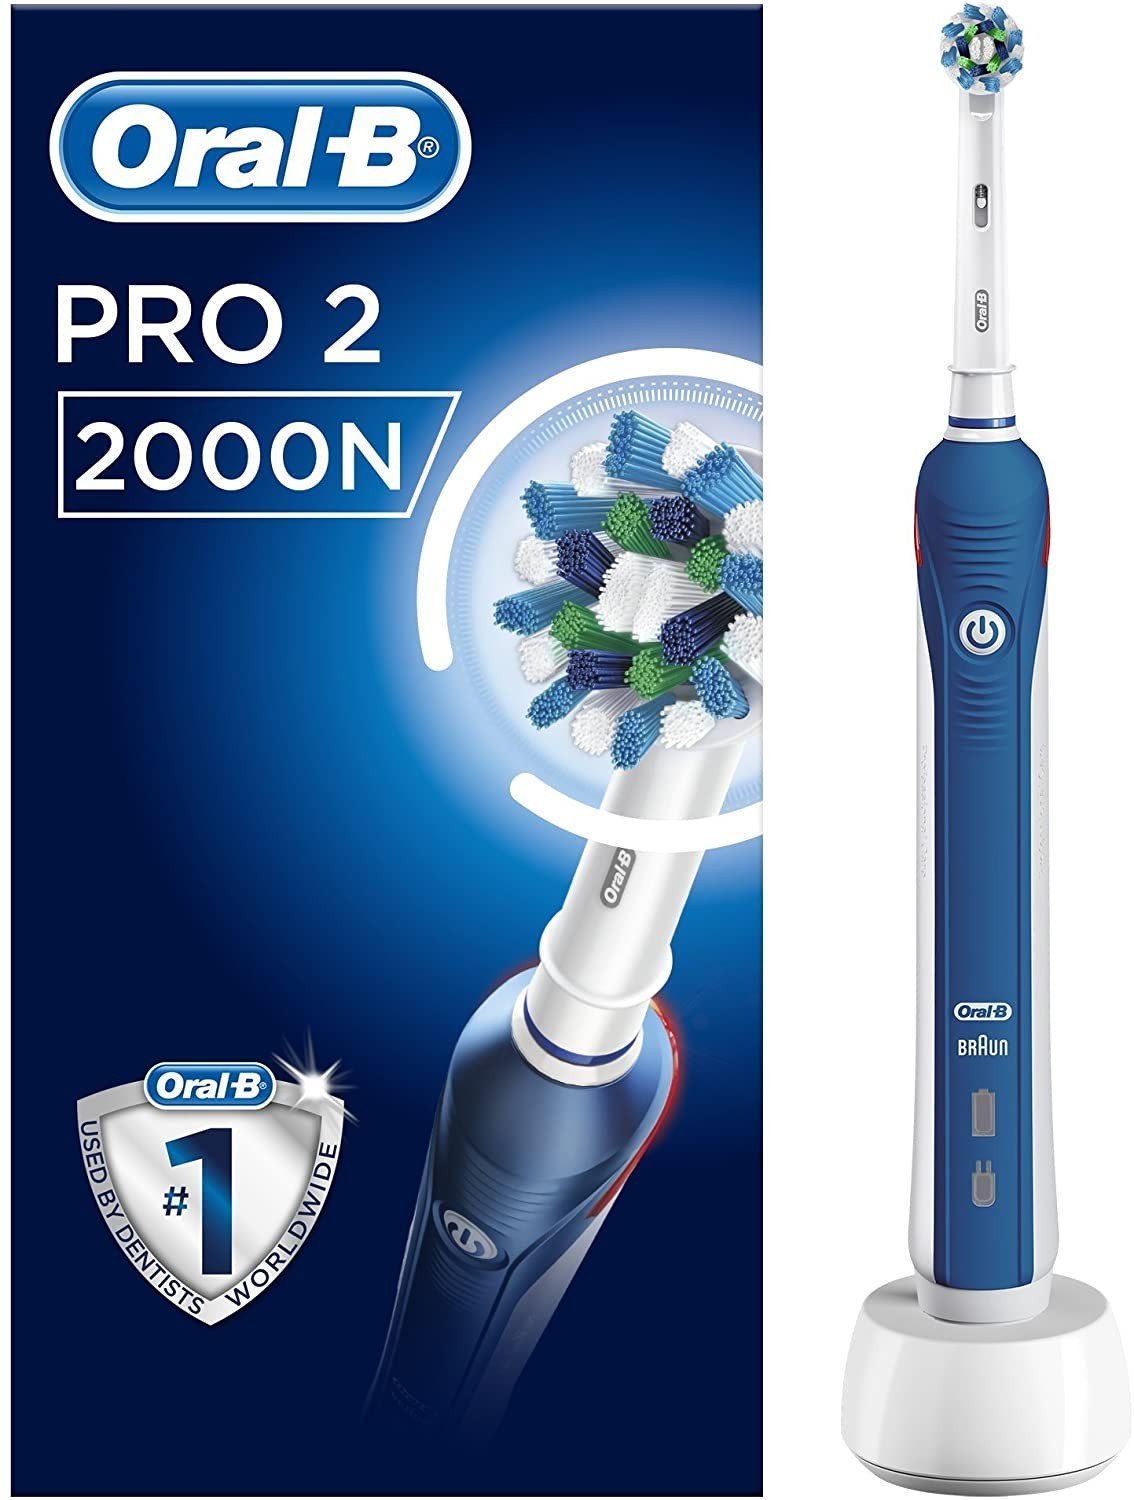 Oral B Professional Discount